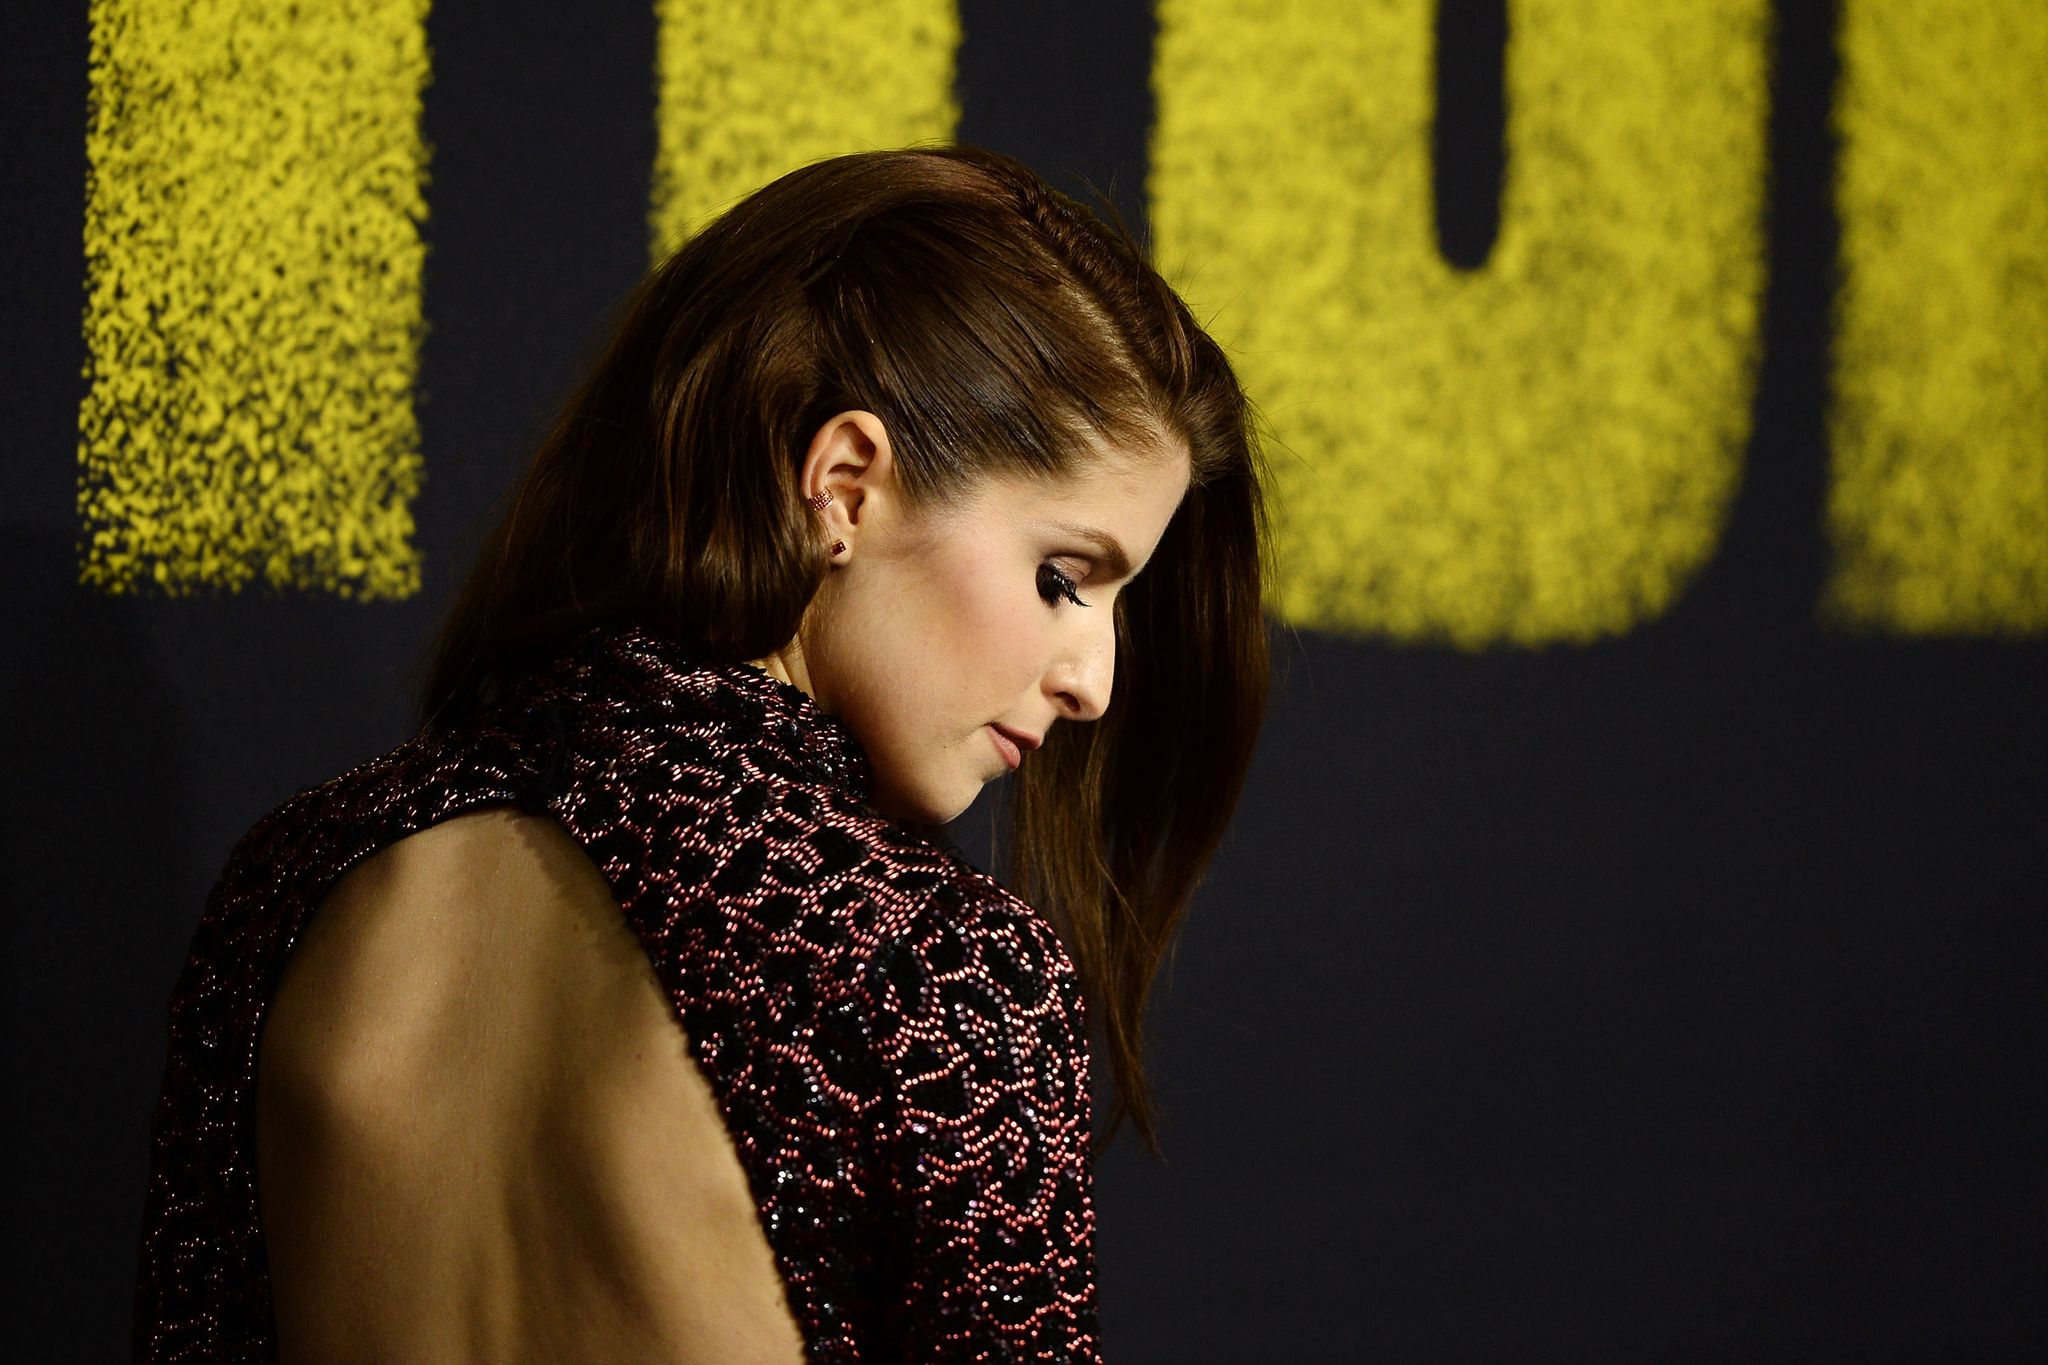 Anna Kendrick at the Pitch Perfect 3 premiere